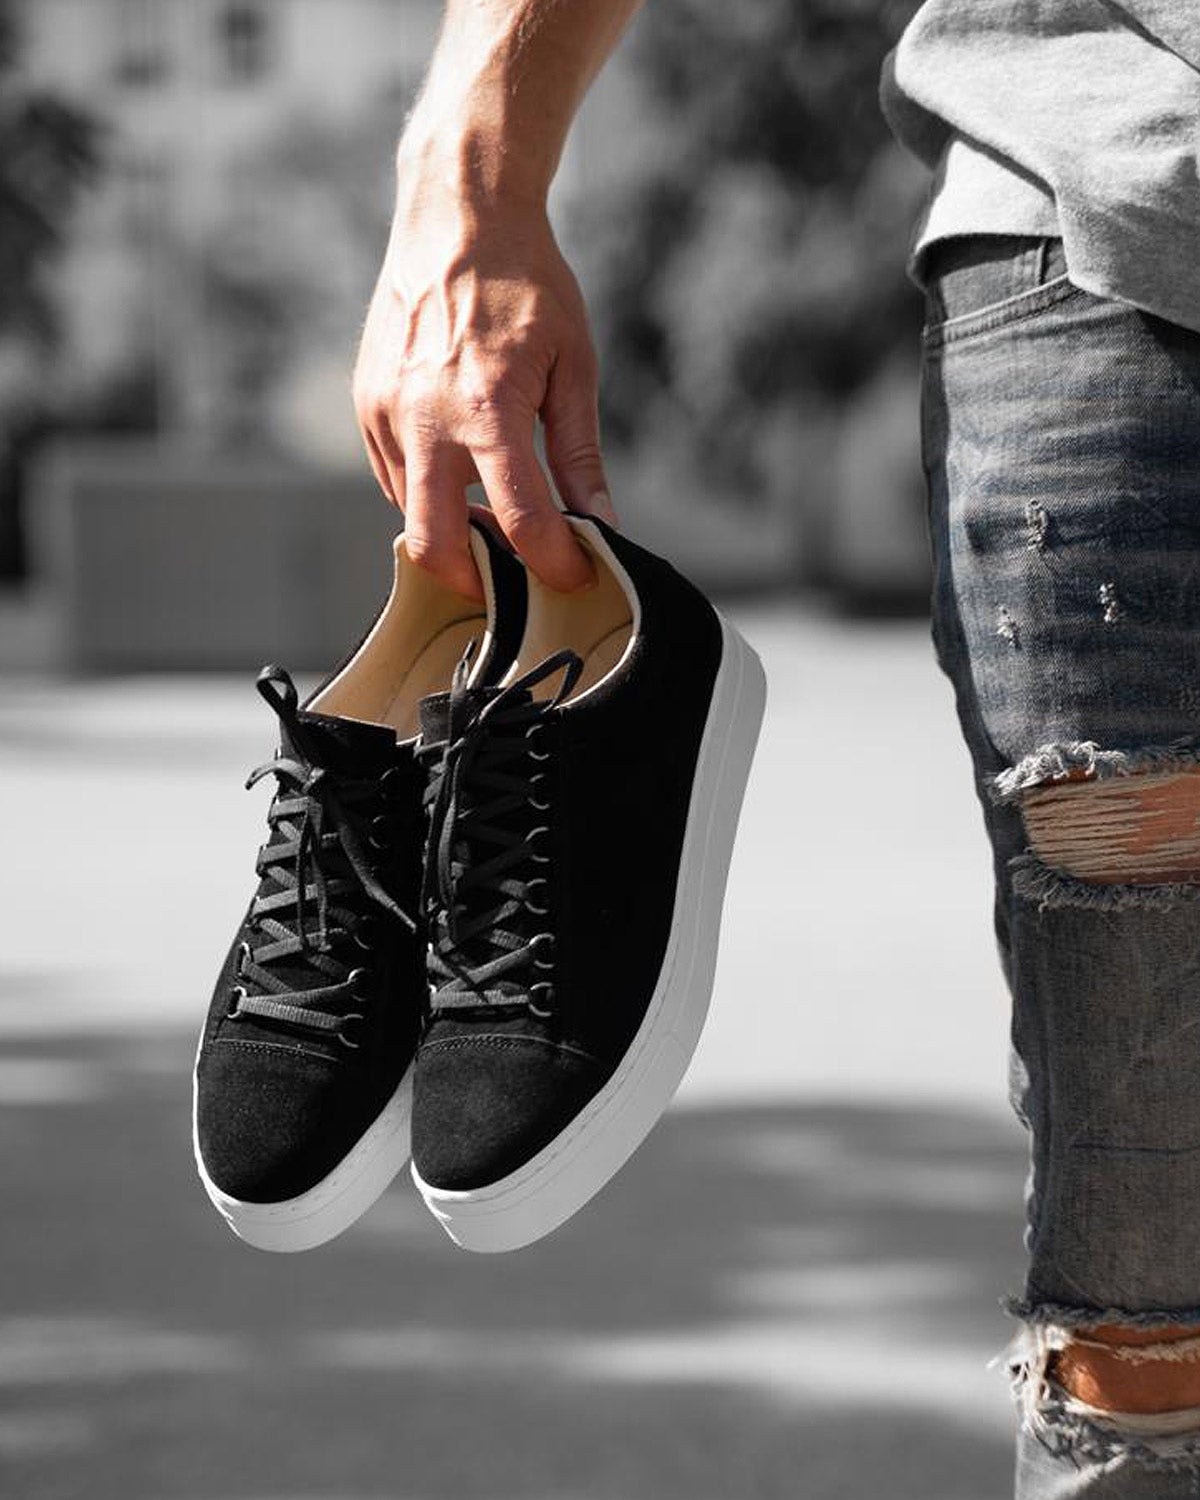 Black leather look lace-up sneakers with white sole for men